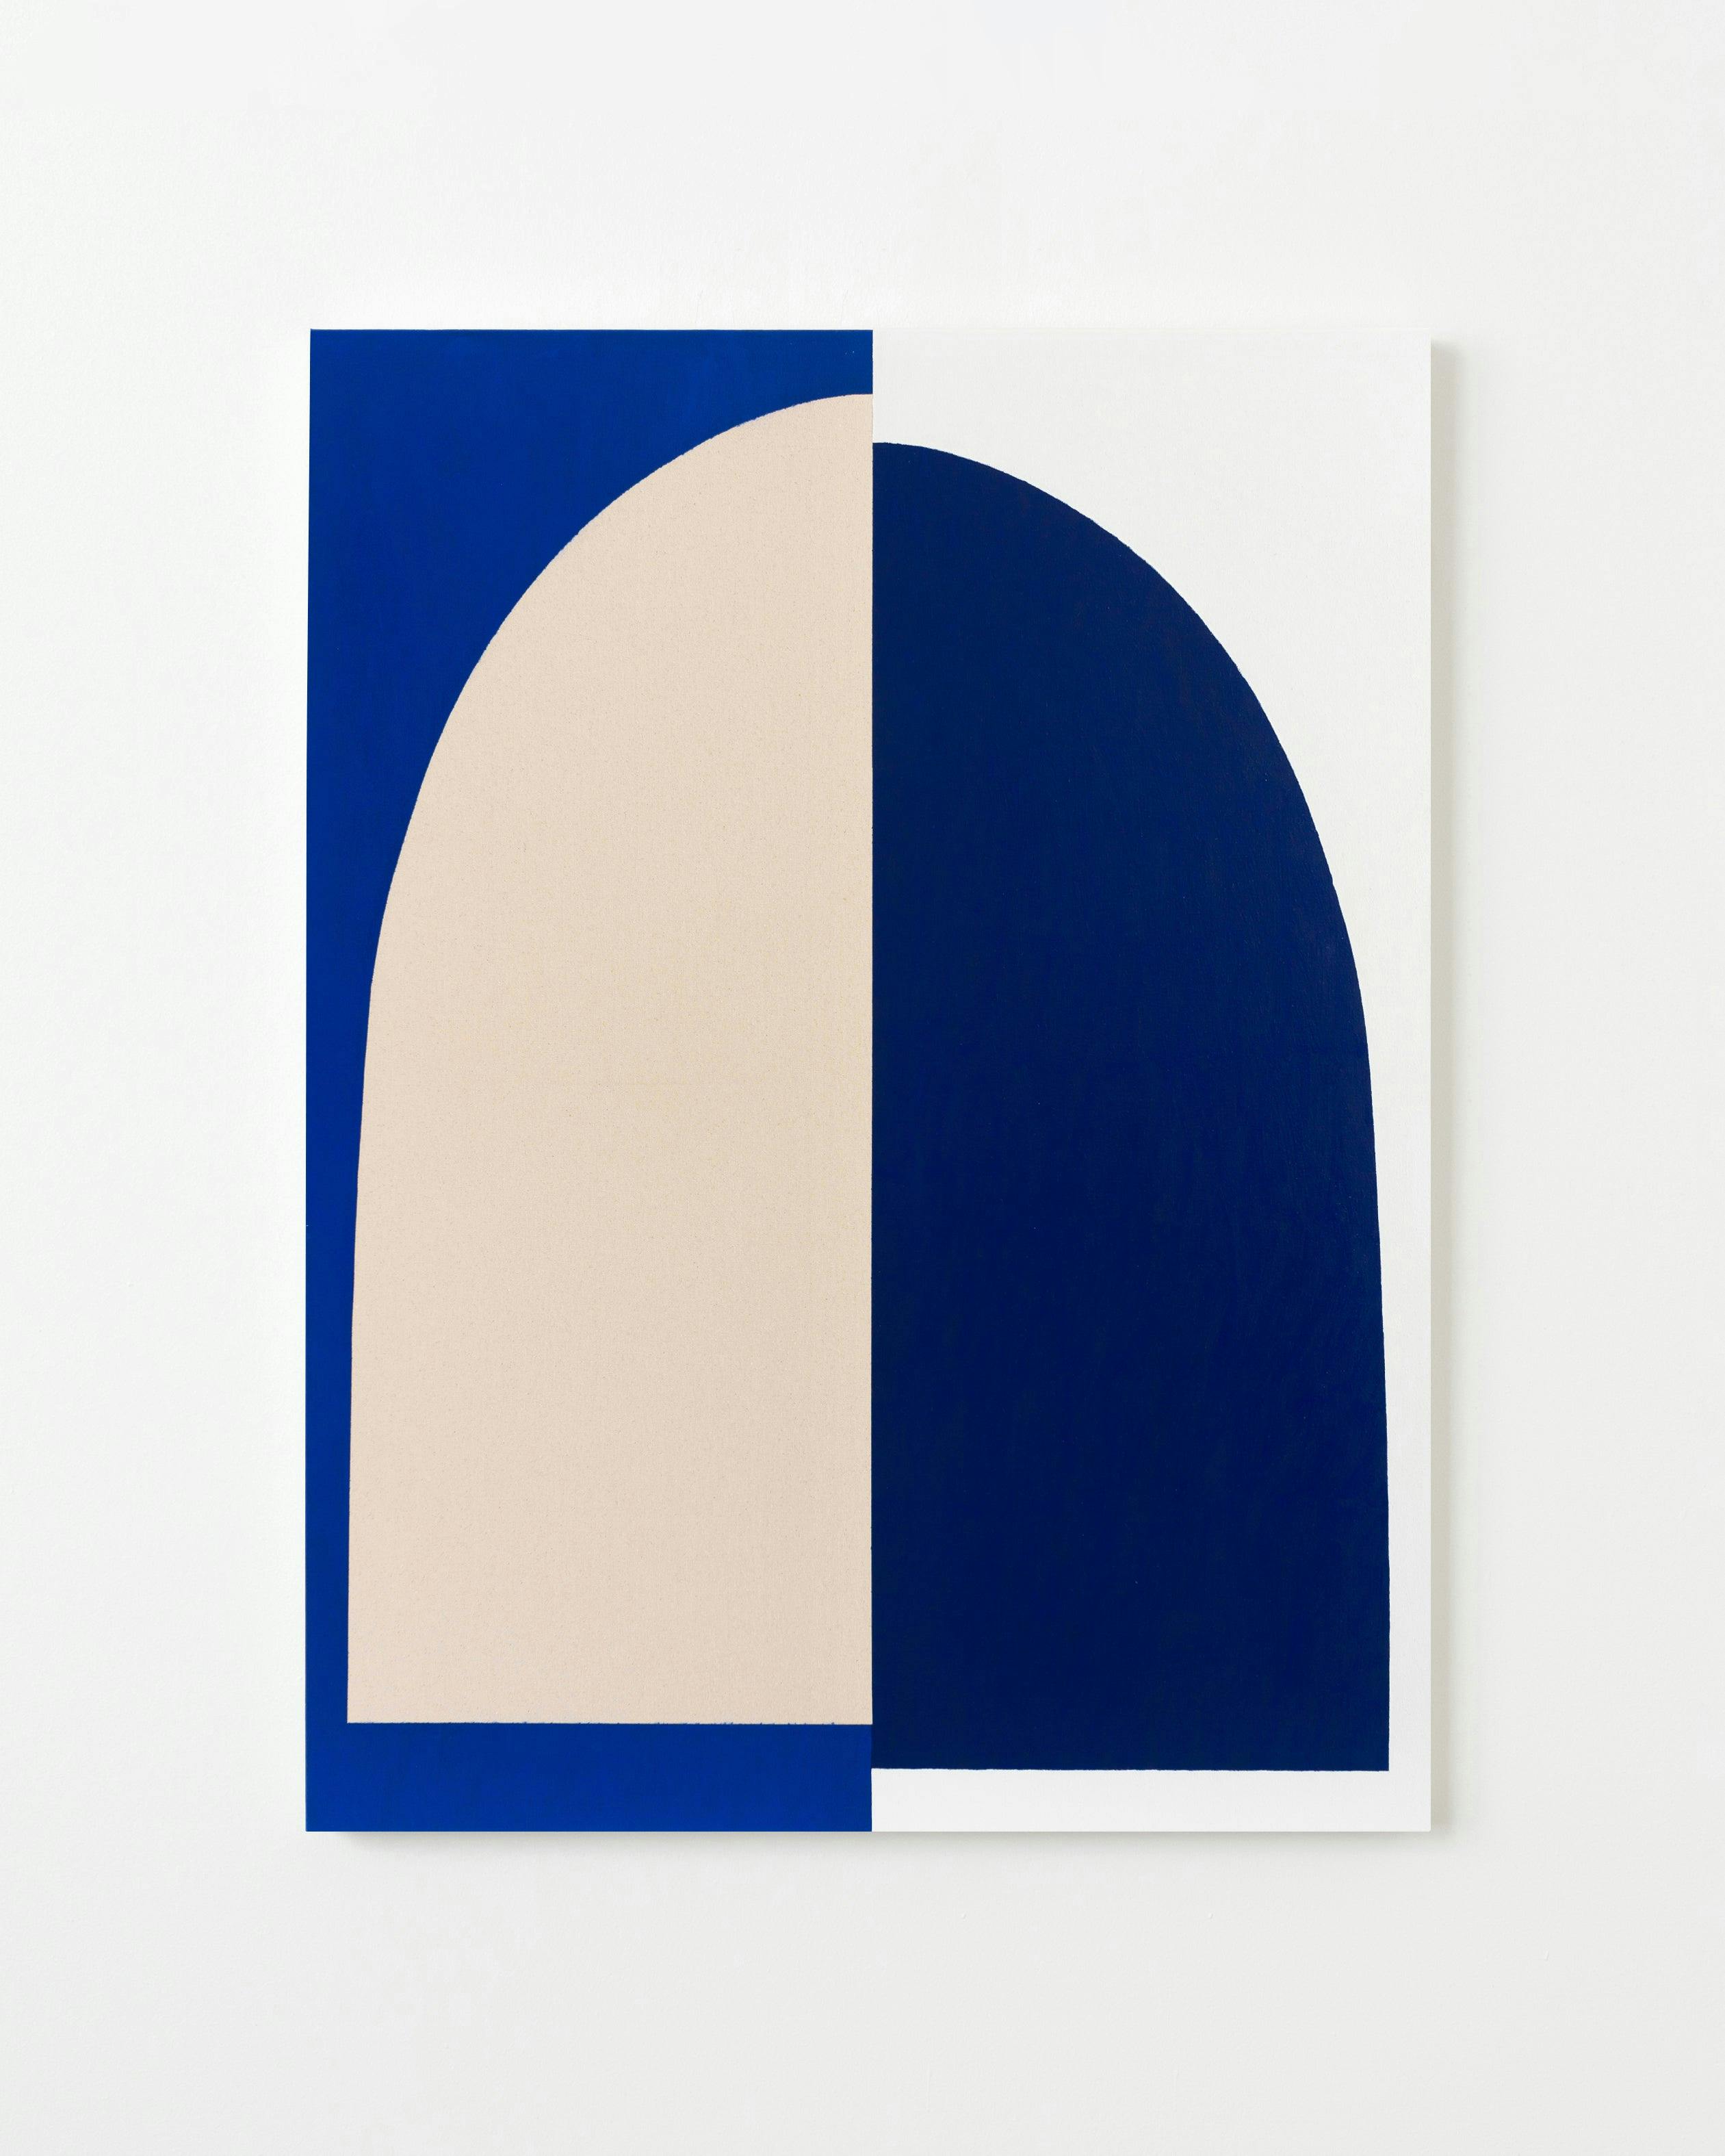 Painting by Aschely Vaughan Cone titled "Double Blue Arch Doublet in White Light".